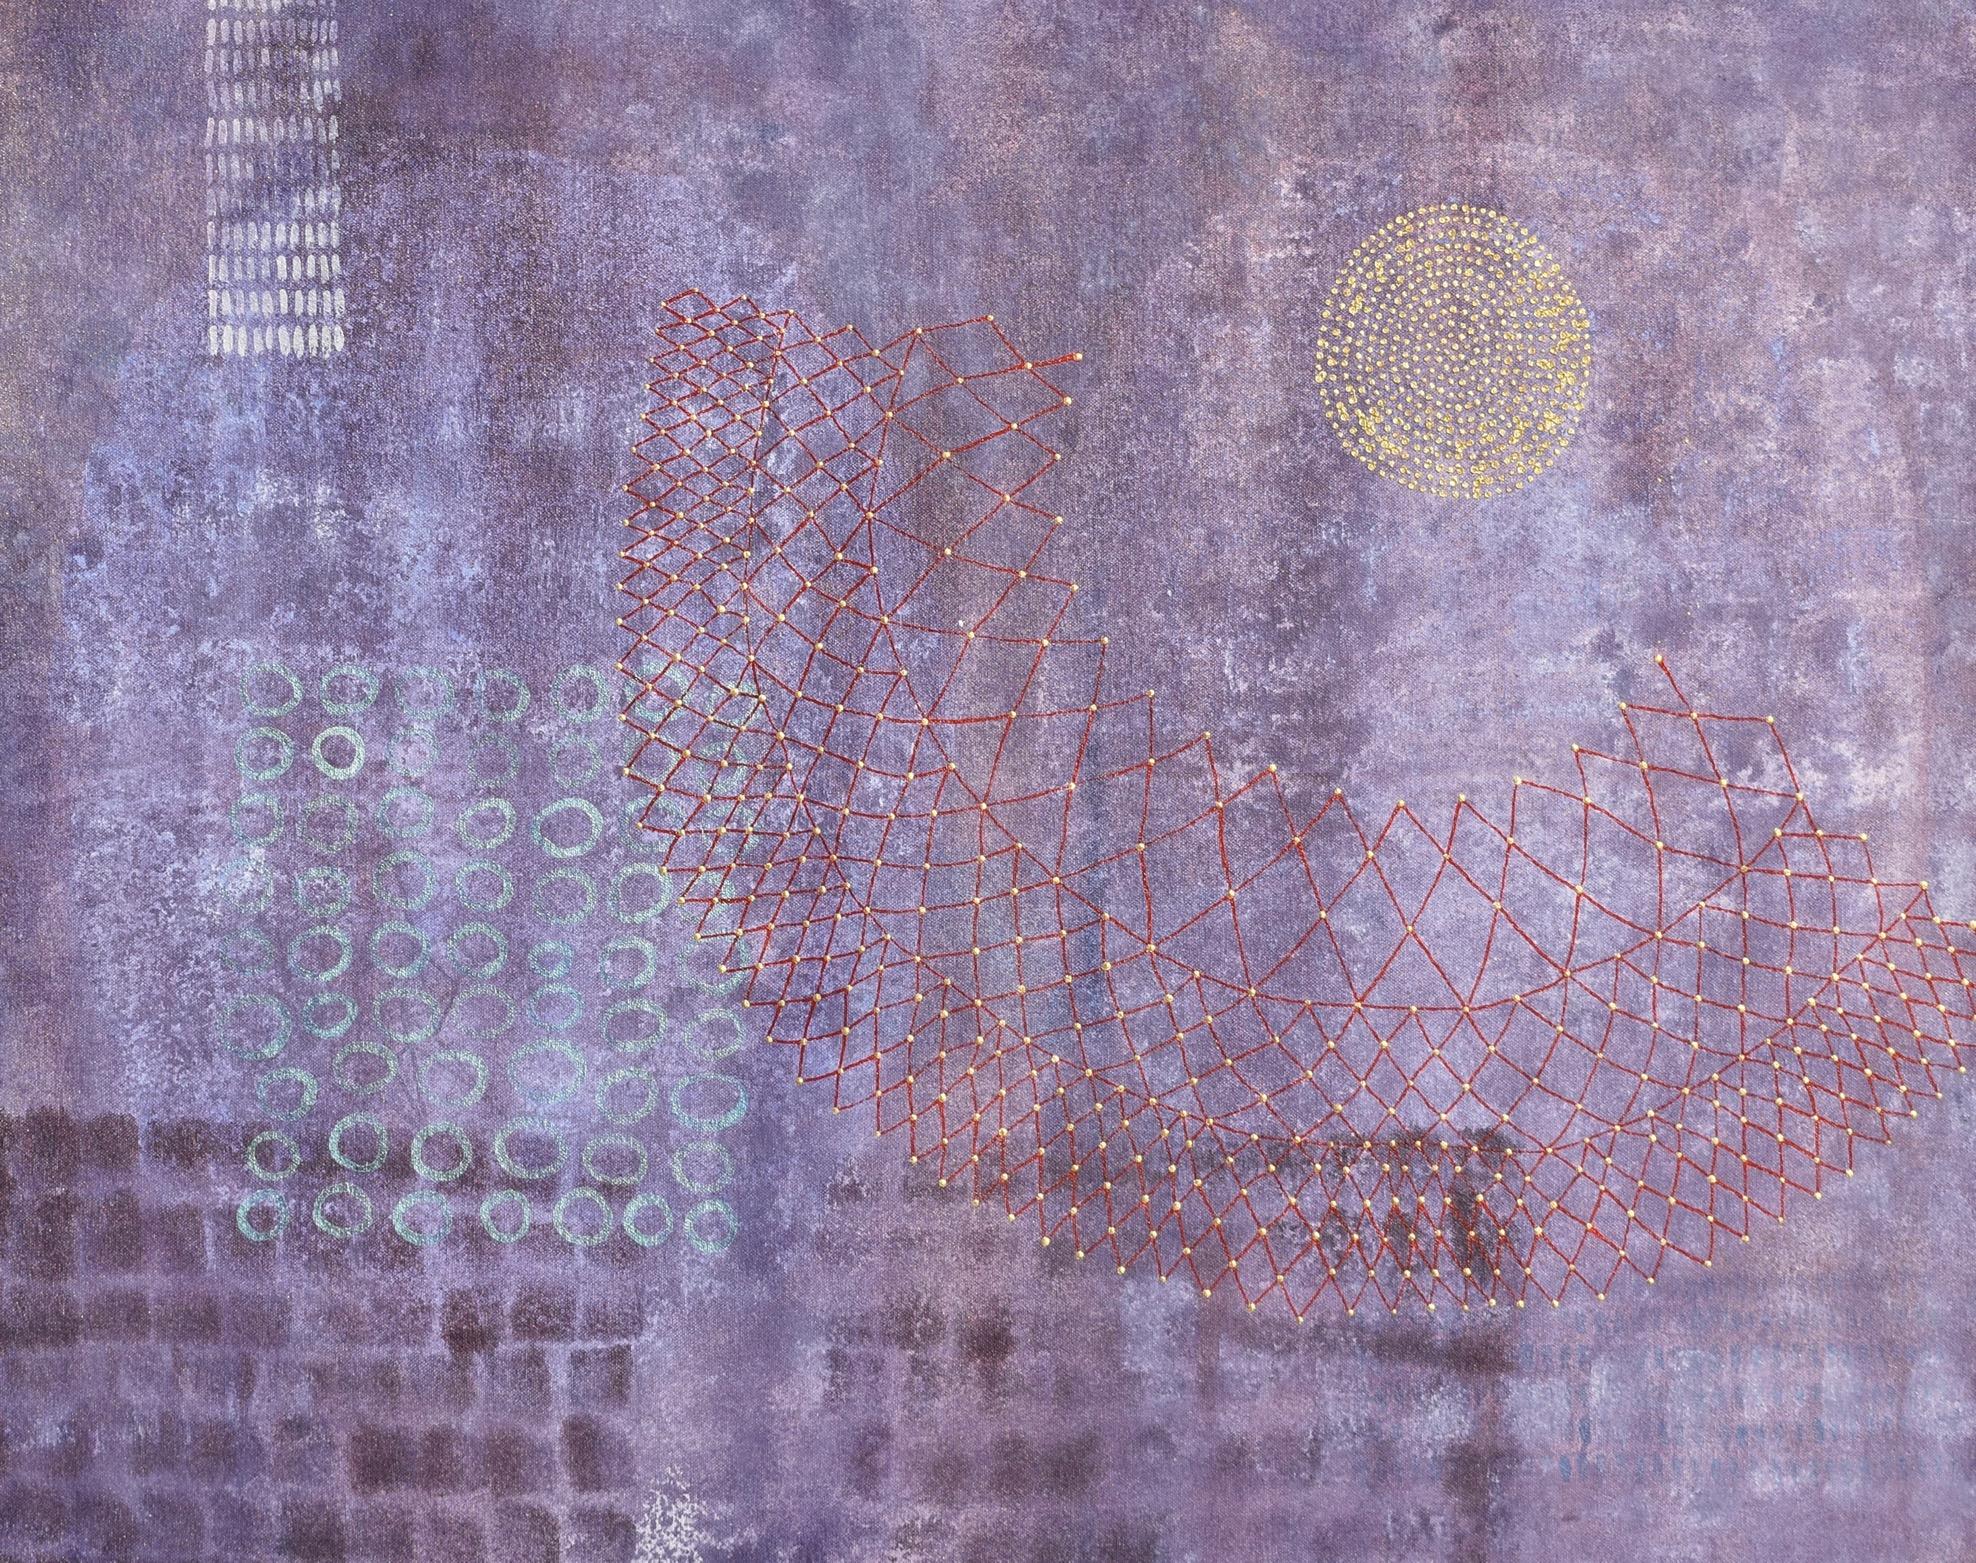 "Emanate", abstract, textured, purples, blues, red, gold, dots, acrylic painting